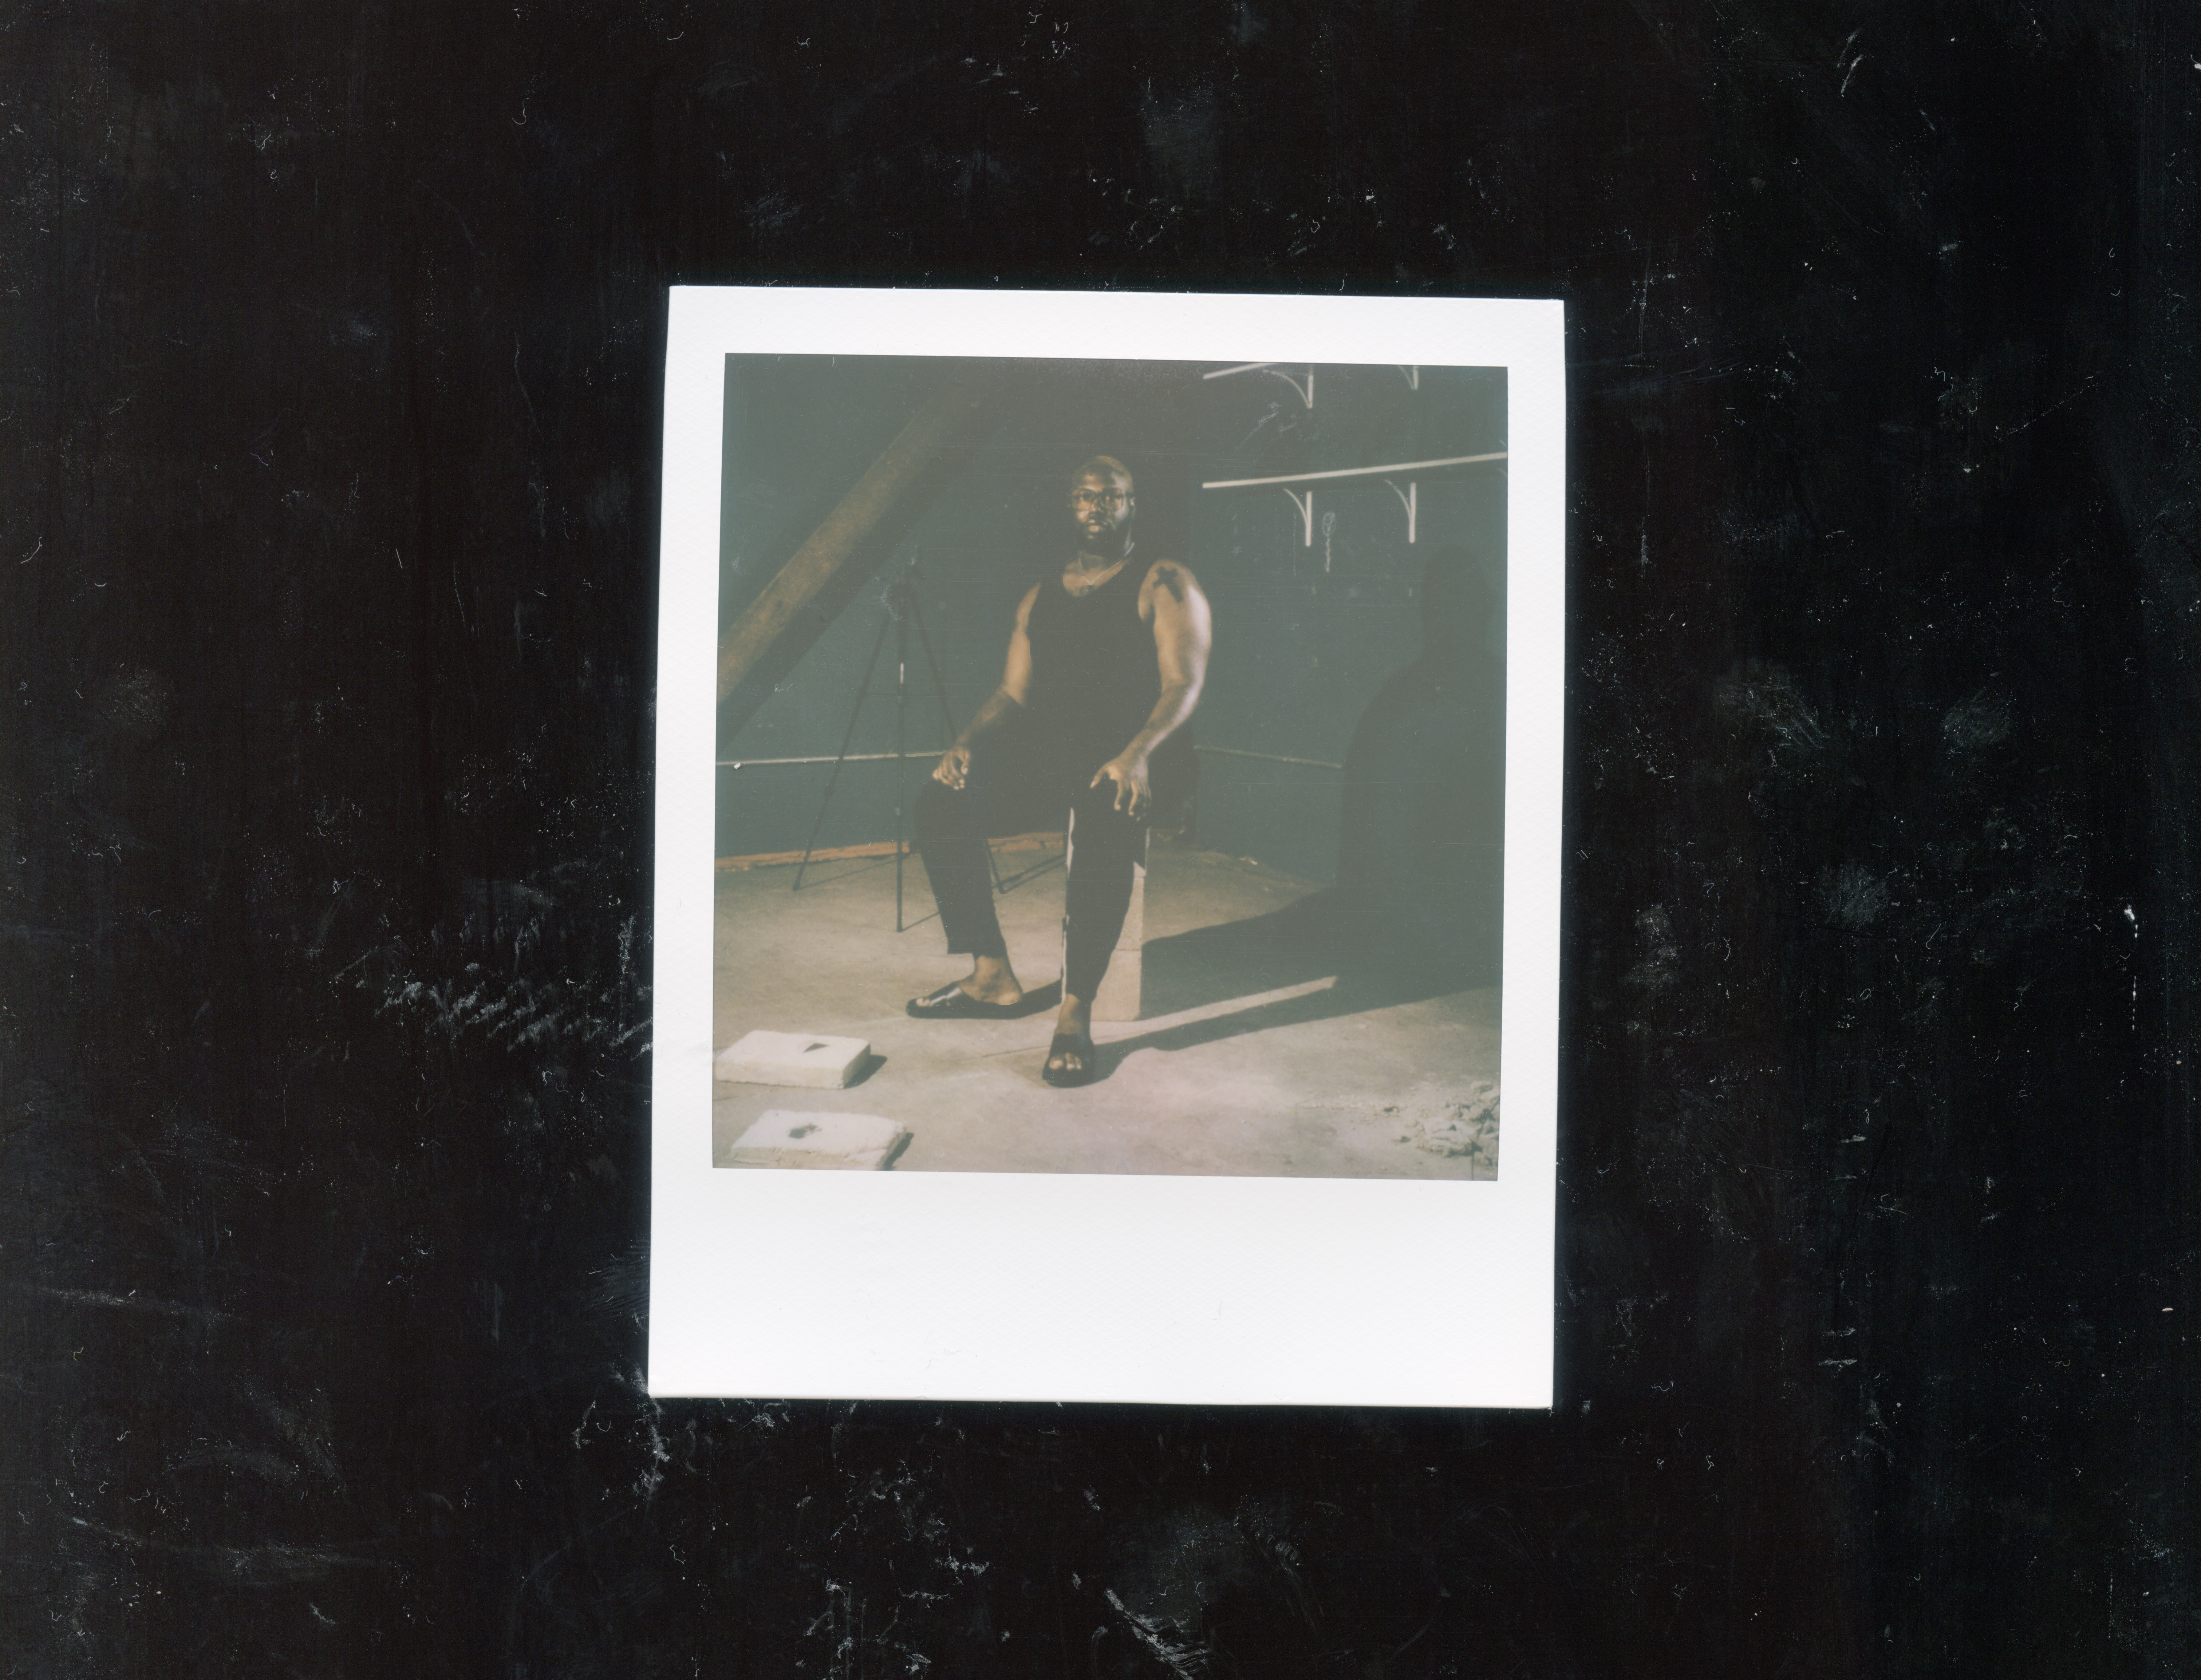 Image: In this scanned self-portrait there is a Polaroid of Shabez Jamal in their studio, wearing all black and seated on a stack of concrete bricks. There are concrete artworks at their feet and in the background is a dark blue wall and shelves. The Polaroid is scanned and placed within the center of the image, floating against a dark black, textured background. Photo by Shabez Jamal.